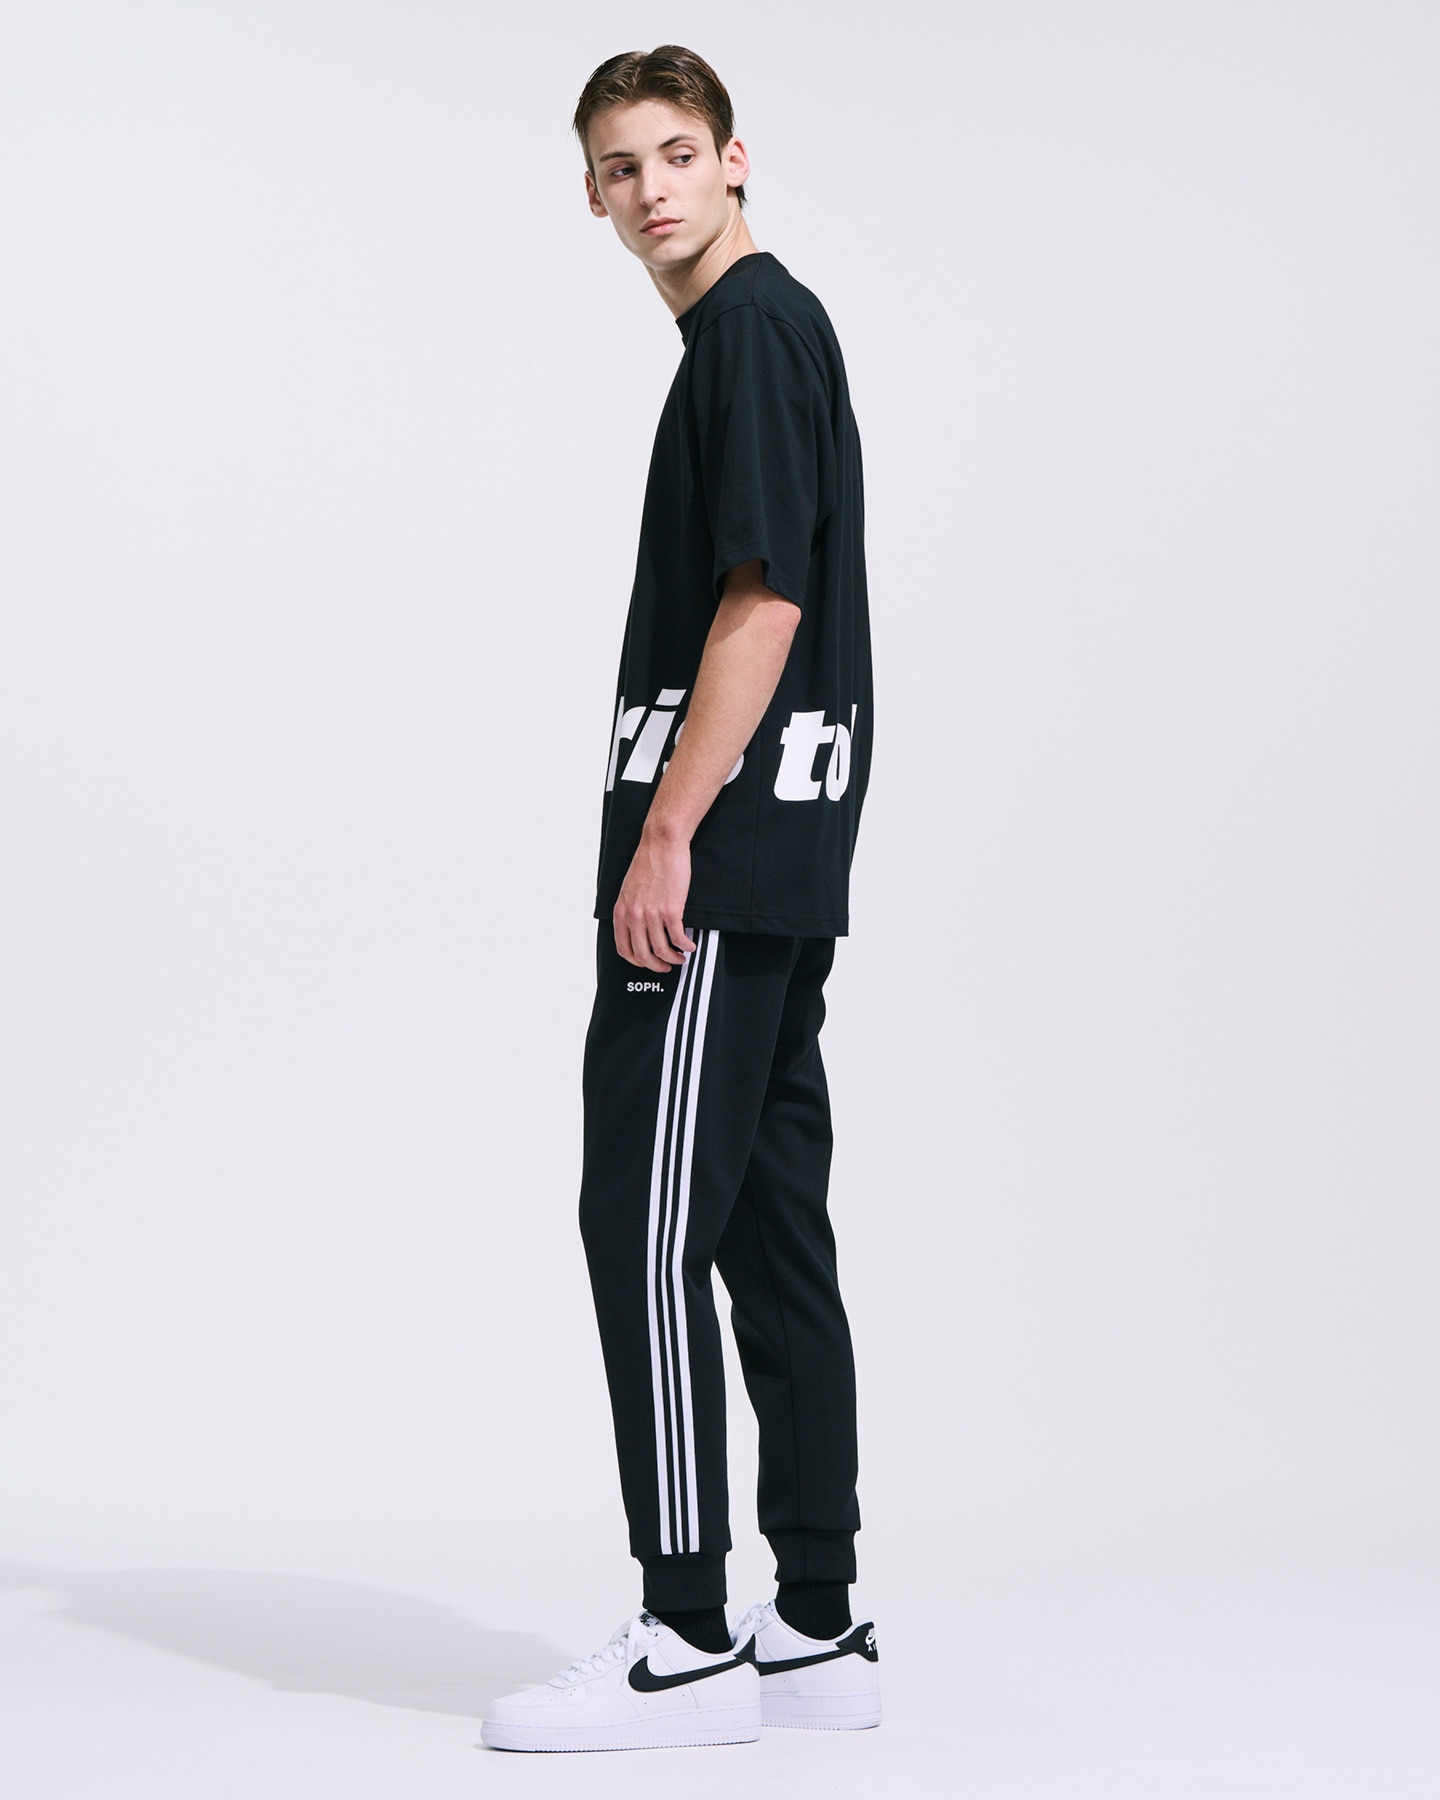 SOPH. | TRAINING TRACK RIBBED PANTS(L OFF WHITE):